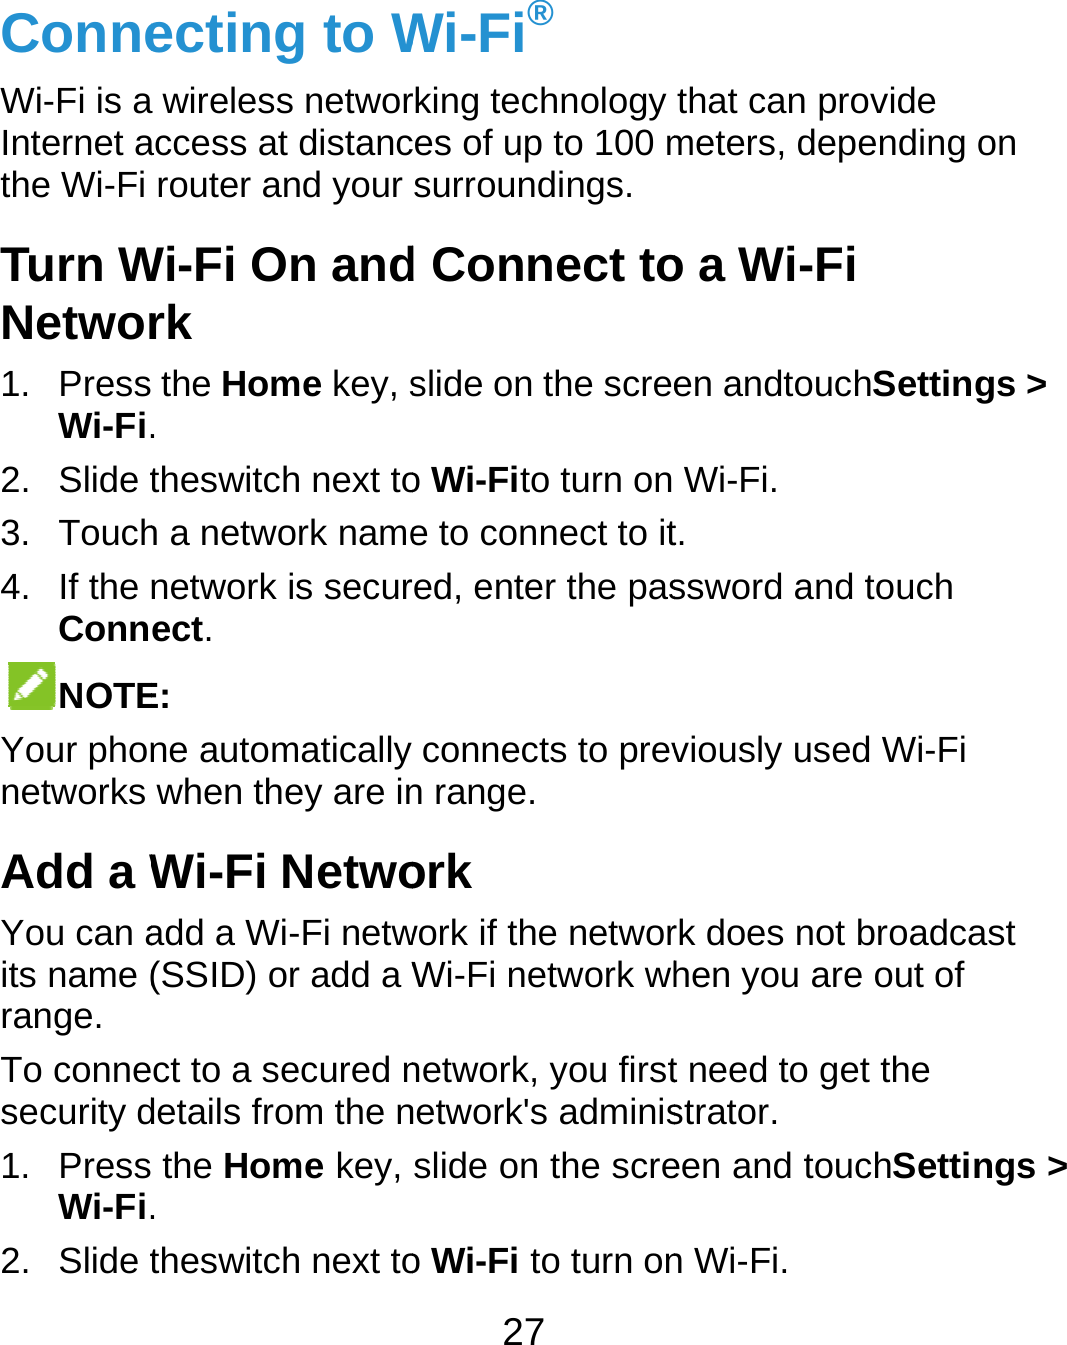  ConneWi-Fi is aInternet athe Wi-Fi Turn WNetwor1. PressWi-Fi.2. Slide t3. Touch4. If the ConnNOTEYour phonnetworks Add a WYou can aits name (range. To connesecurity d1. PressWi-Fi.2. Slide tecting to W wireless networaccess at distancrouter and your Wi-Fi On andrk  the Home key, s. theswitch next toh a network namenetwork is securect. E:  ne automatically when they are inWi-Fi Netwoadd a Wi-Fi netw(SSID) or add a Wct to a secured ndetails from the n the Home key, . theswitch next to27 Wi-Fi® rking technology ces of up to 100 msurroundings.d Connect toslide on the screeo Wi-Fito turn on e to connect to itred, enter the pasconnects to prevn range. ork work if the networWi-Fi network whnetwork, you firstnetwork&apos;s adminisslide on the screo Wi-Fi to turn onthat can providemeters, dependino a Wi-Fi en andtouchSettWi-Fi.  t. ssword and toucviously used Wi-rk does not broadhen you are out t need to get the strator. een and touchSen Wi-Fi.  ng on tings &gt; h -Fi dcast of ettings &gt; 